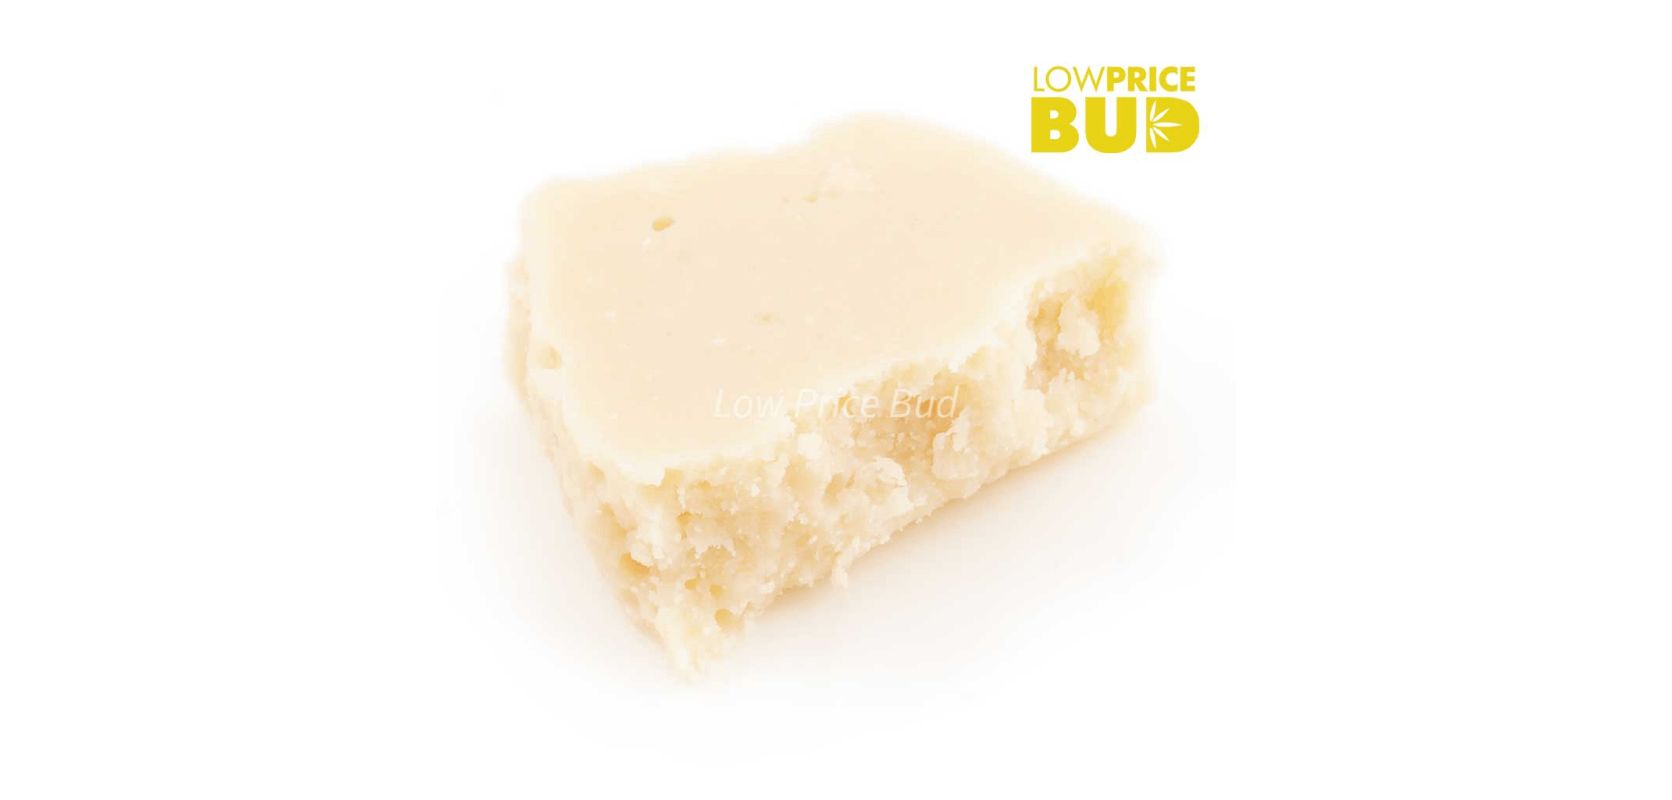 The Budder – Maui Wowie is a potent cannabis concentrate featuring an iconic Sativa strain. 